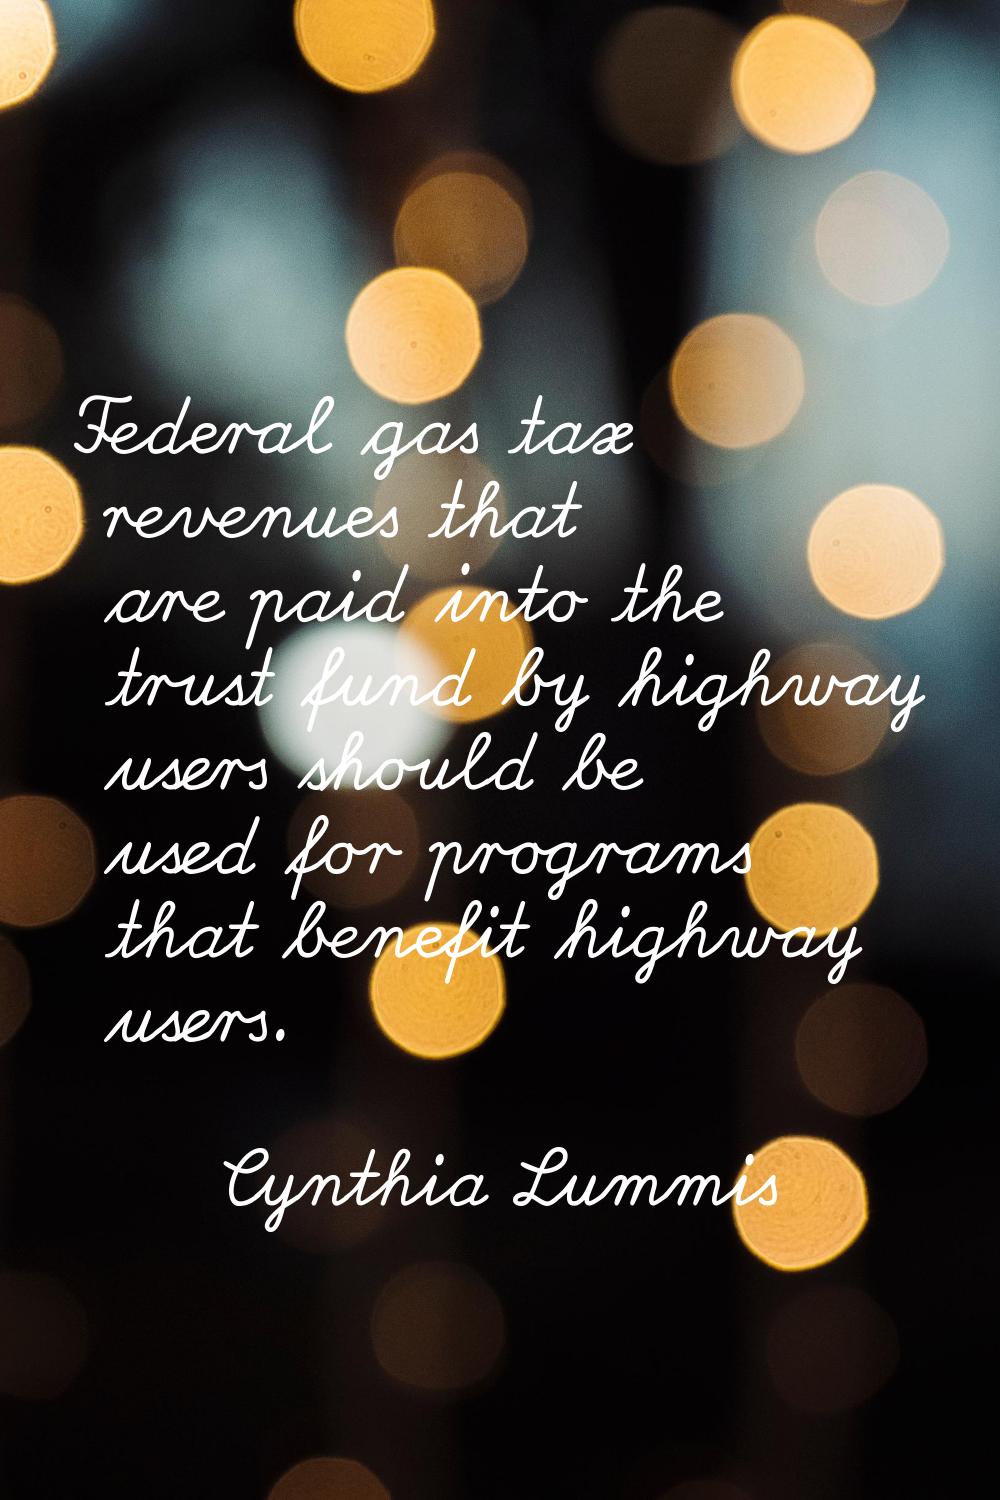 Federal gas tax revenues that are paid into the trust fund by highway users should be used for prog